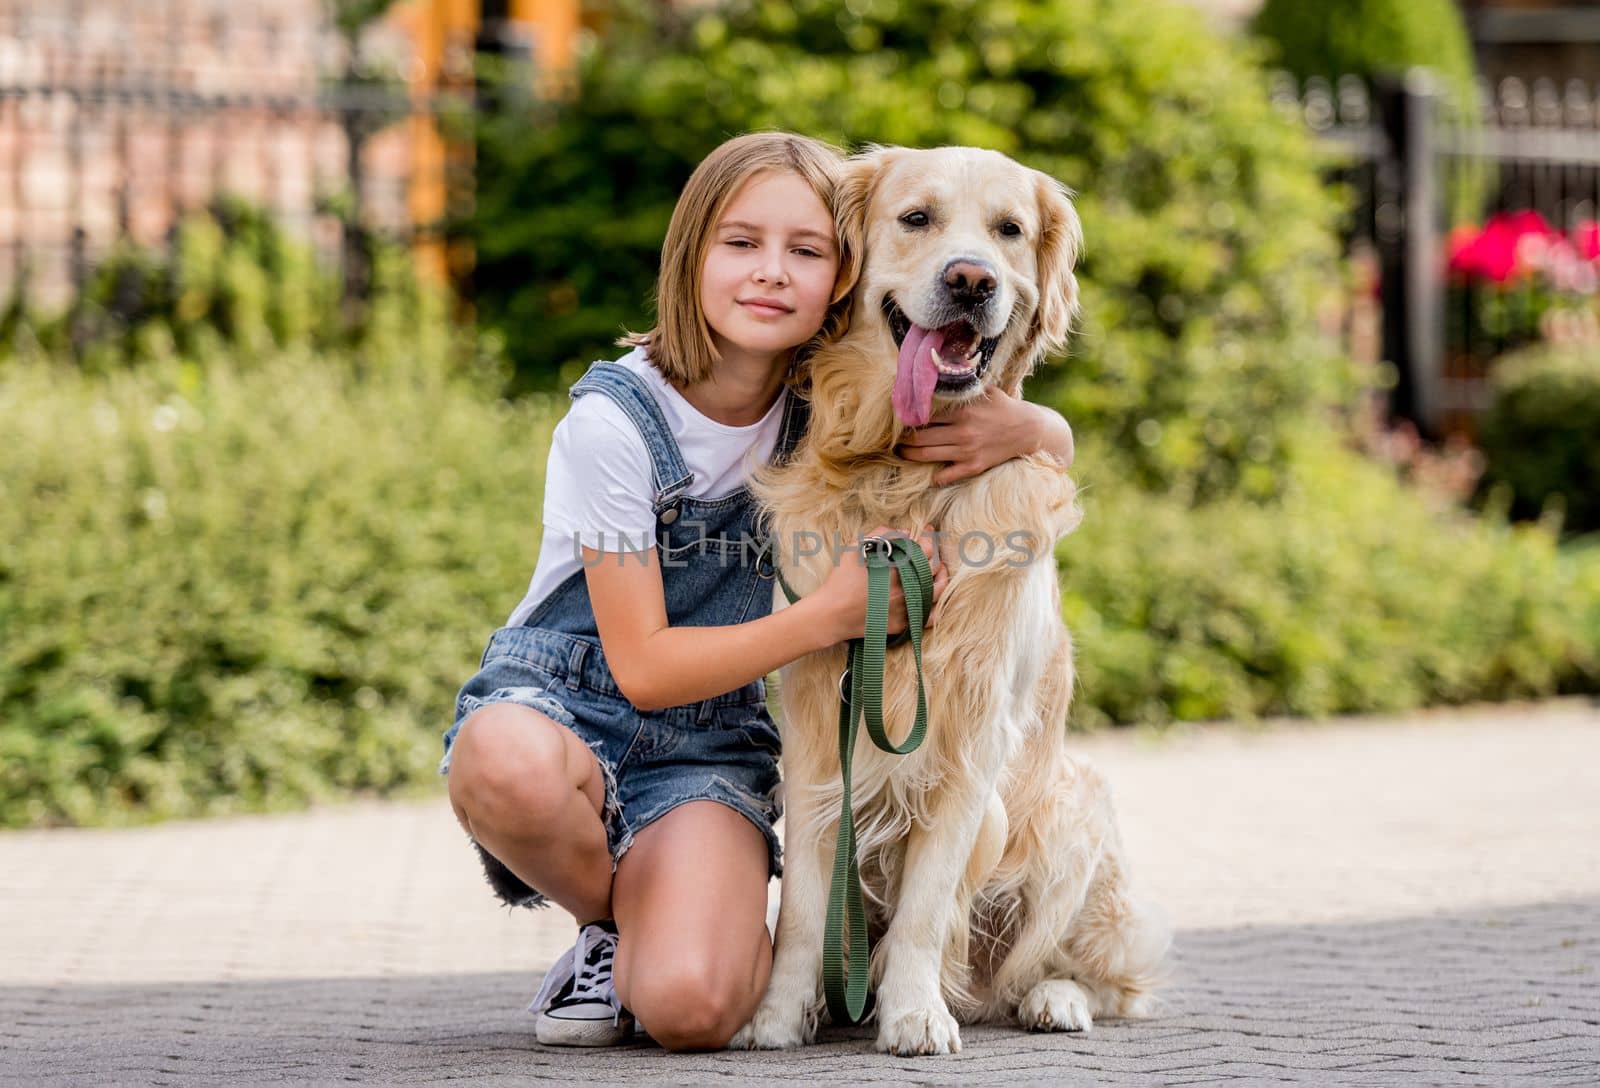 Preteen girl petting golden retriever dog at street. Female child kid with purebred dog labrador sits on ground.